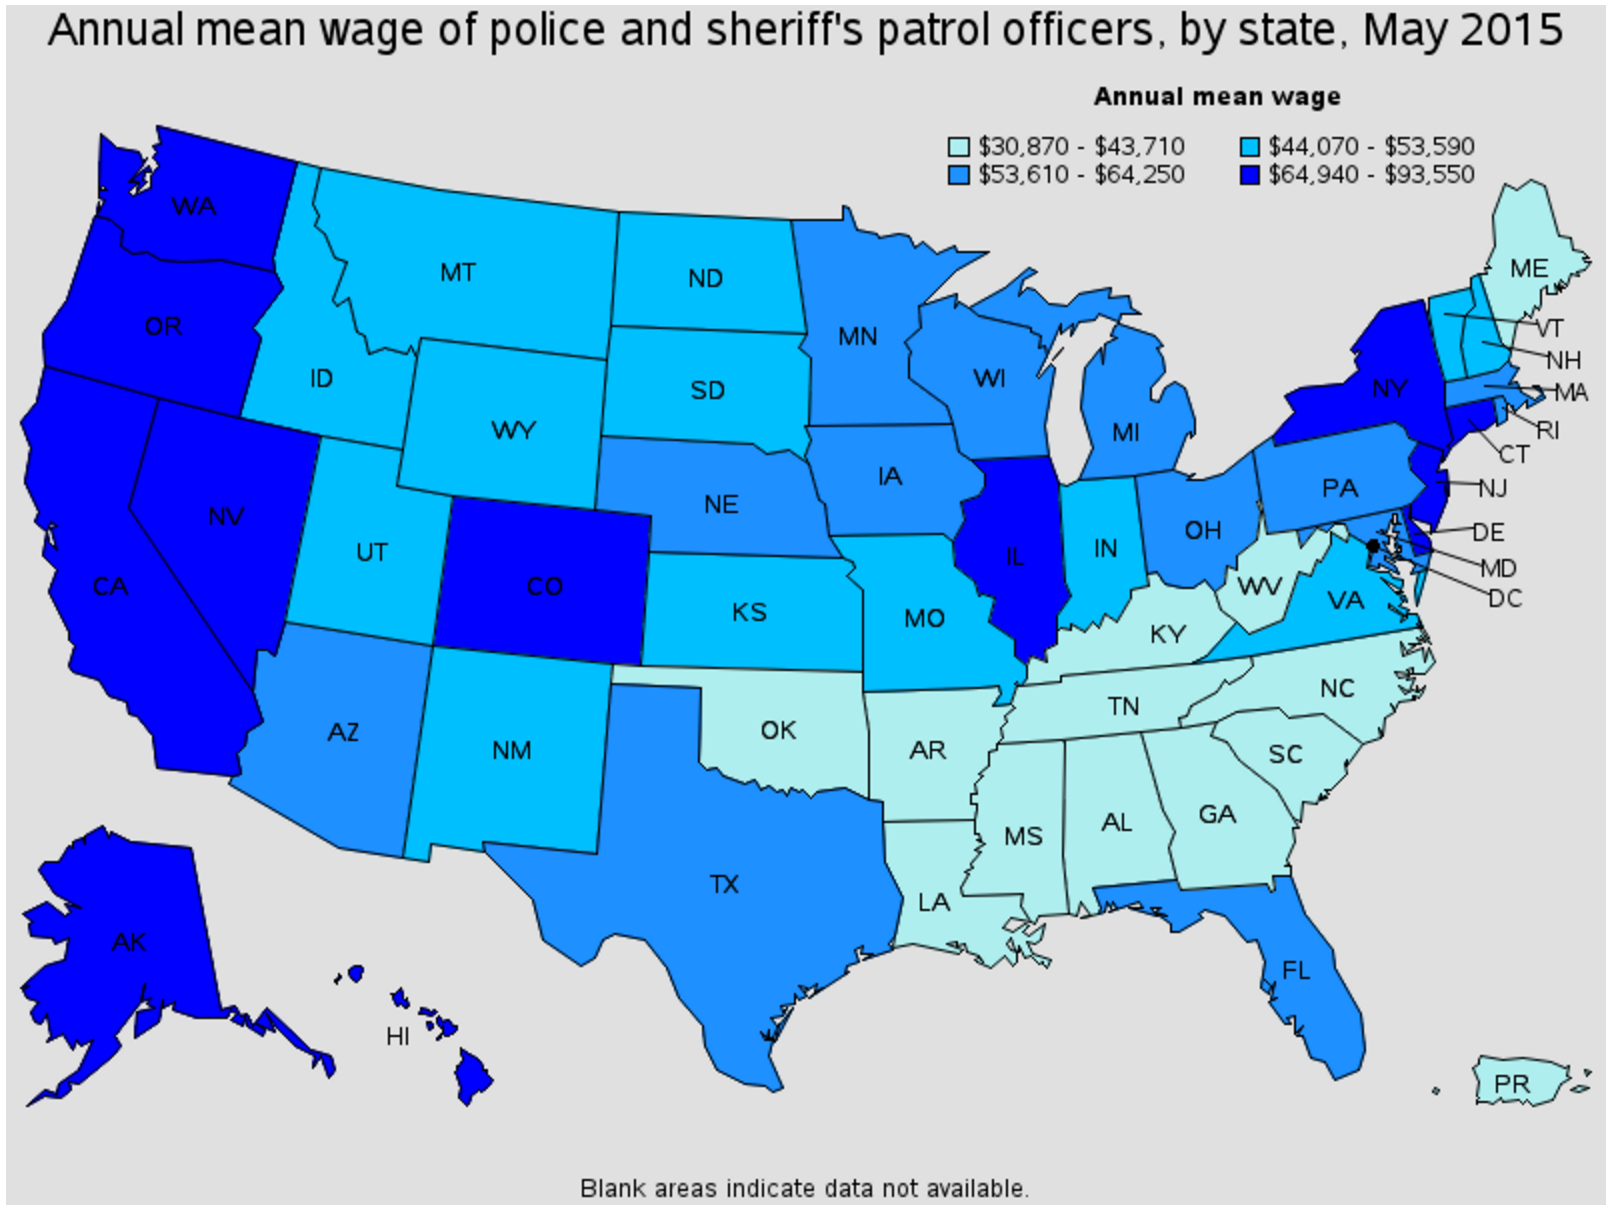 Central police officer average salary by state